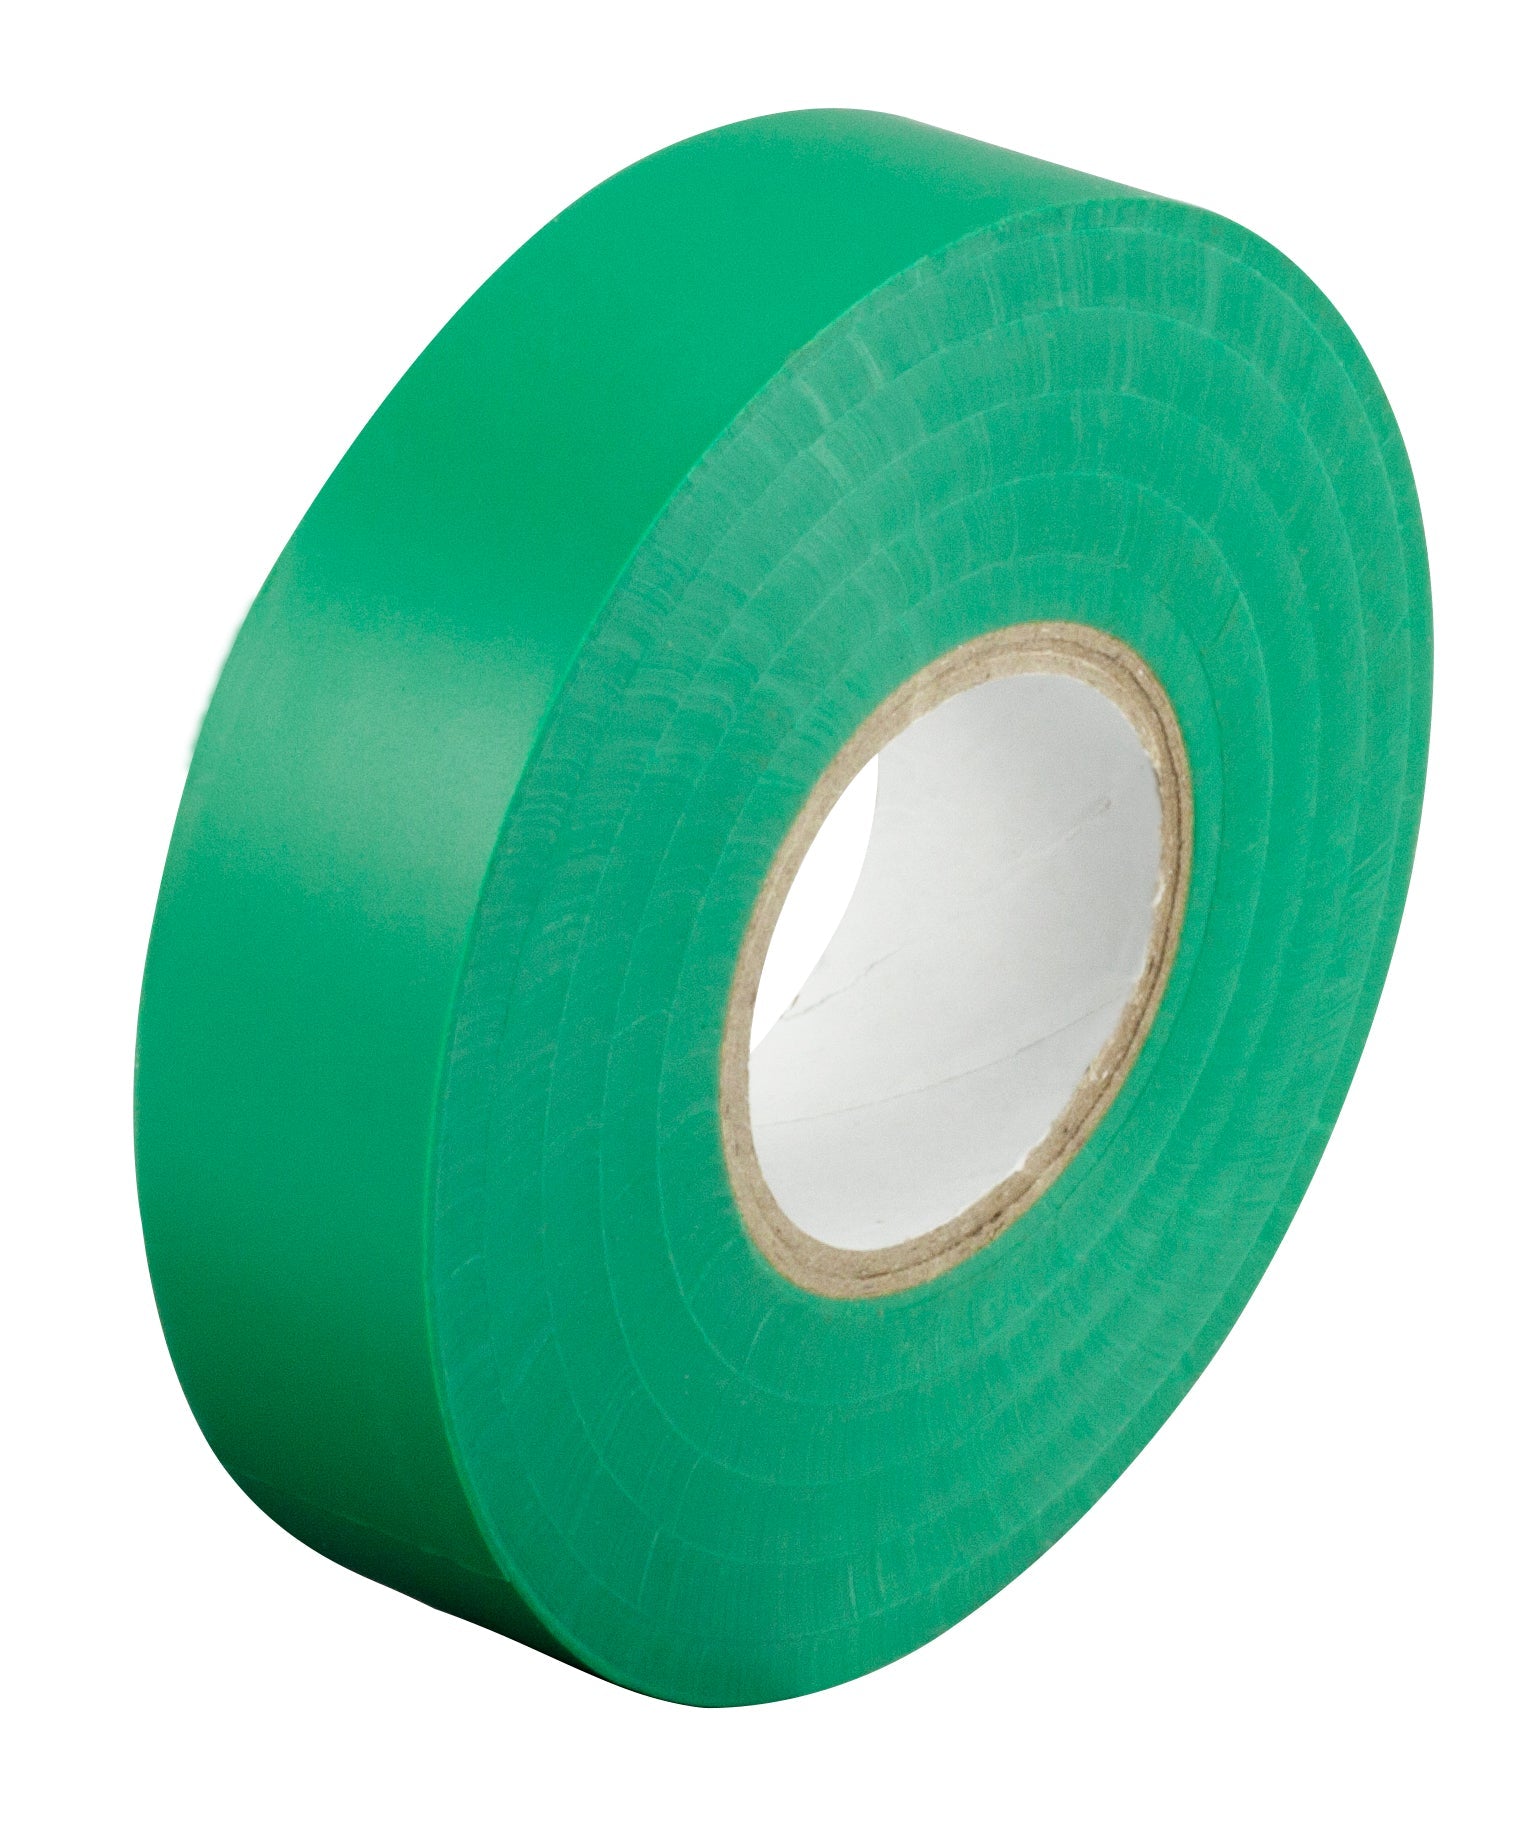 PVC Tape Size: 19mmx33m Roll - Green - Pack of 10